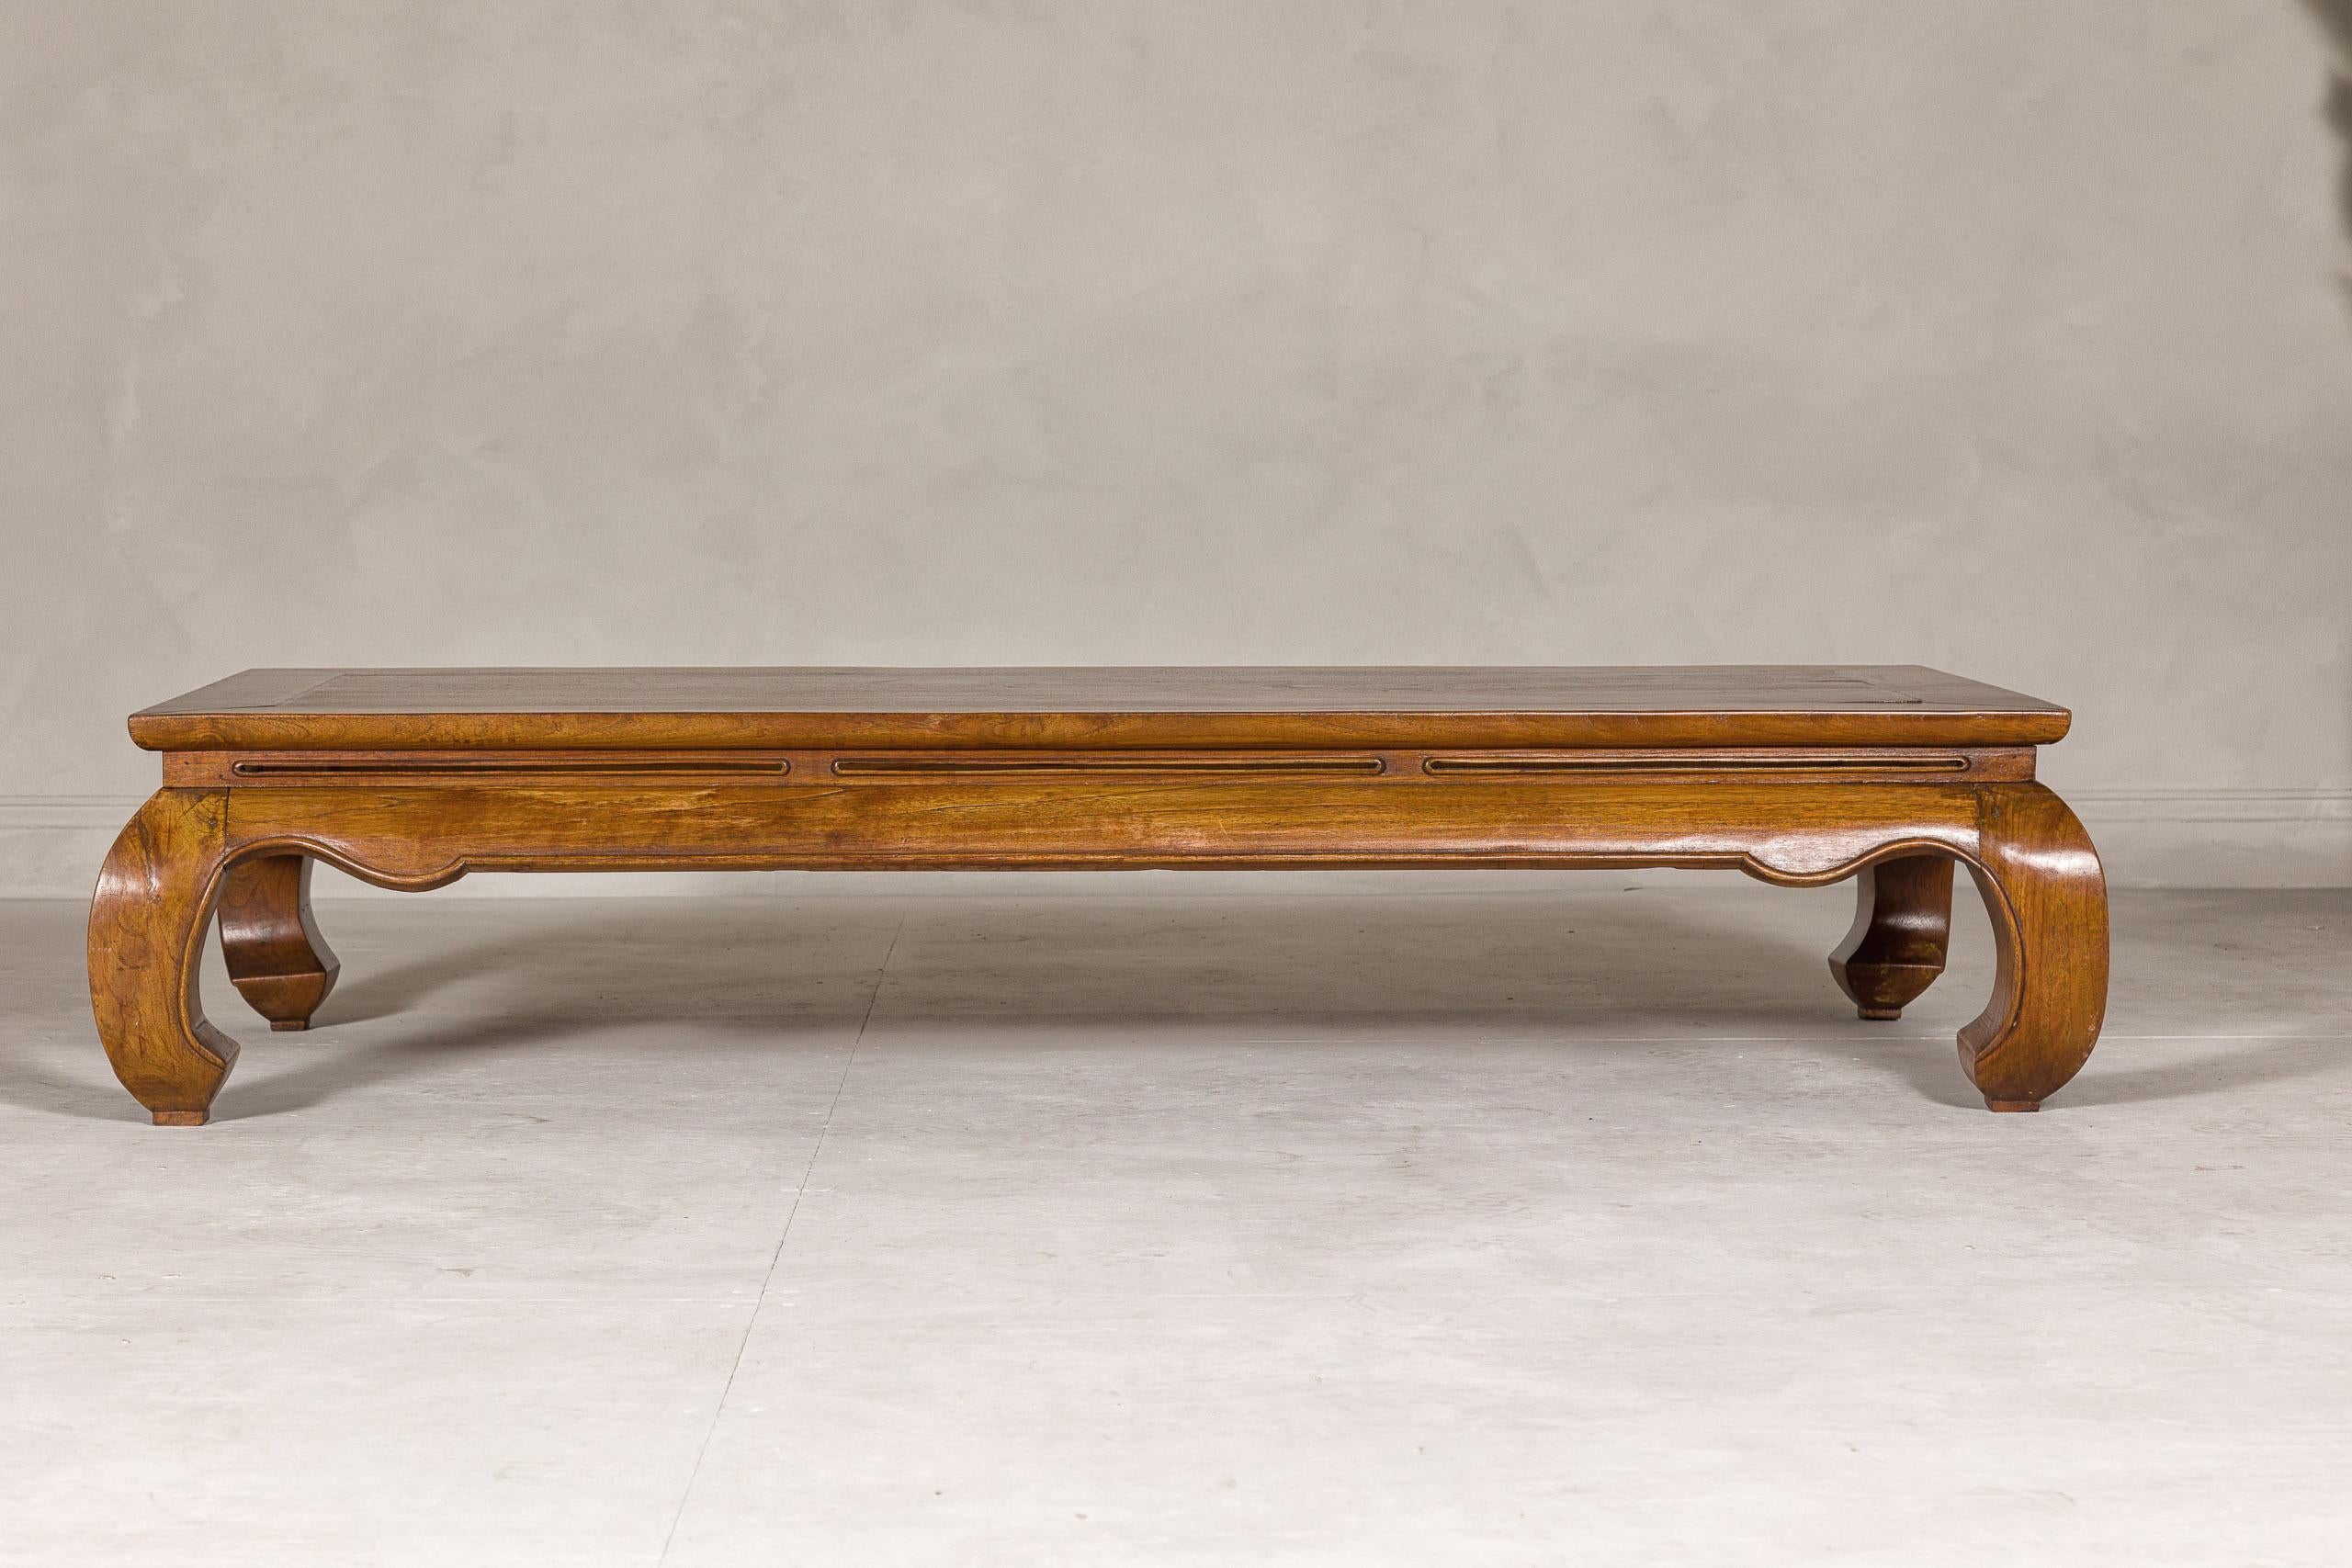 A late Qing Dynasty period long coffee table from the early 20th century with chow legs and waisted apron. This exquisite late Qing Dynasty long coffee table, dating from the early 20th century, gracefully combines traditional Chinese aesthetics